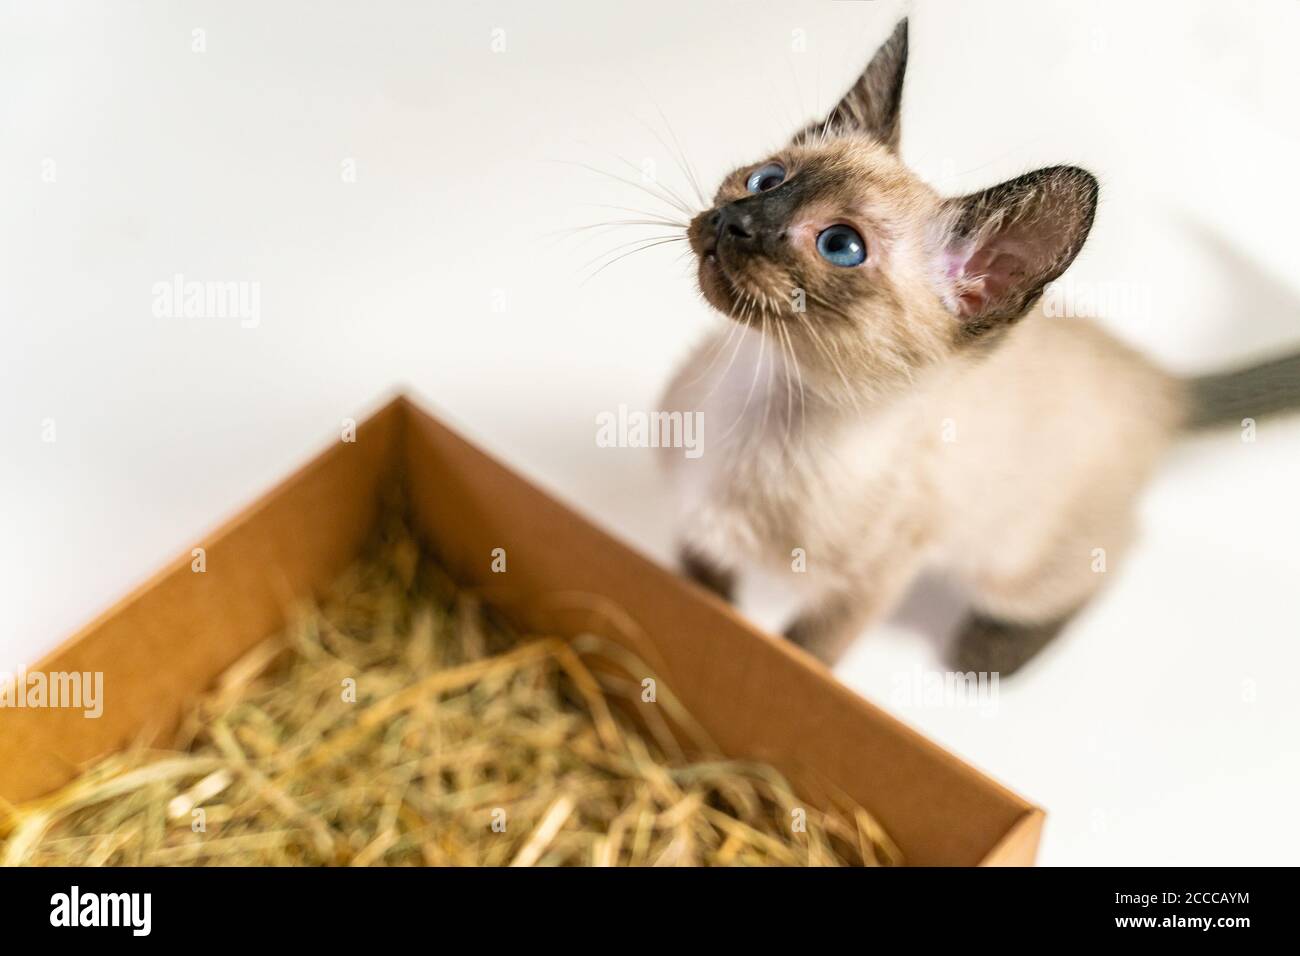 Purebred 2 month old Siamese cat with blue almond shaped eyes on box basket background. Thai kitten hiding in a box basket. Concepts of pets play hidi Stock Photo